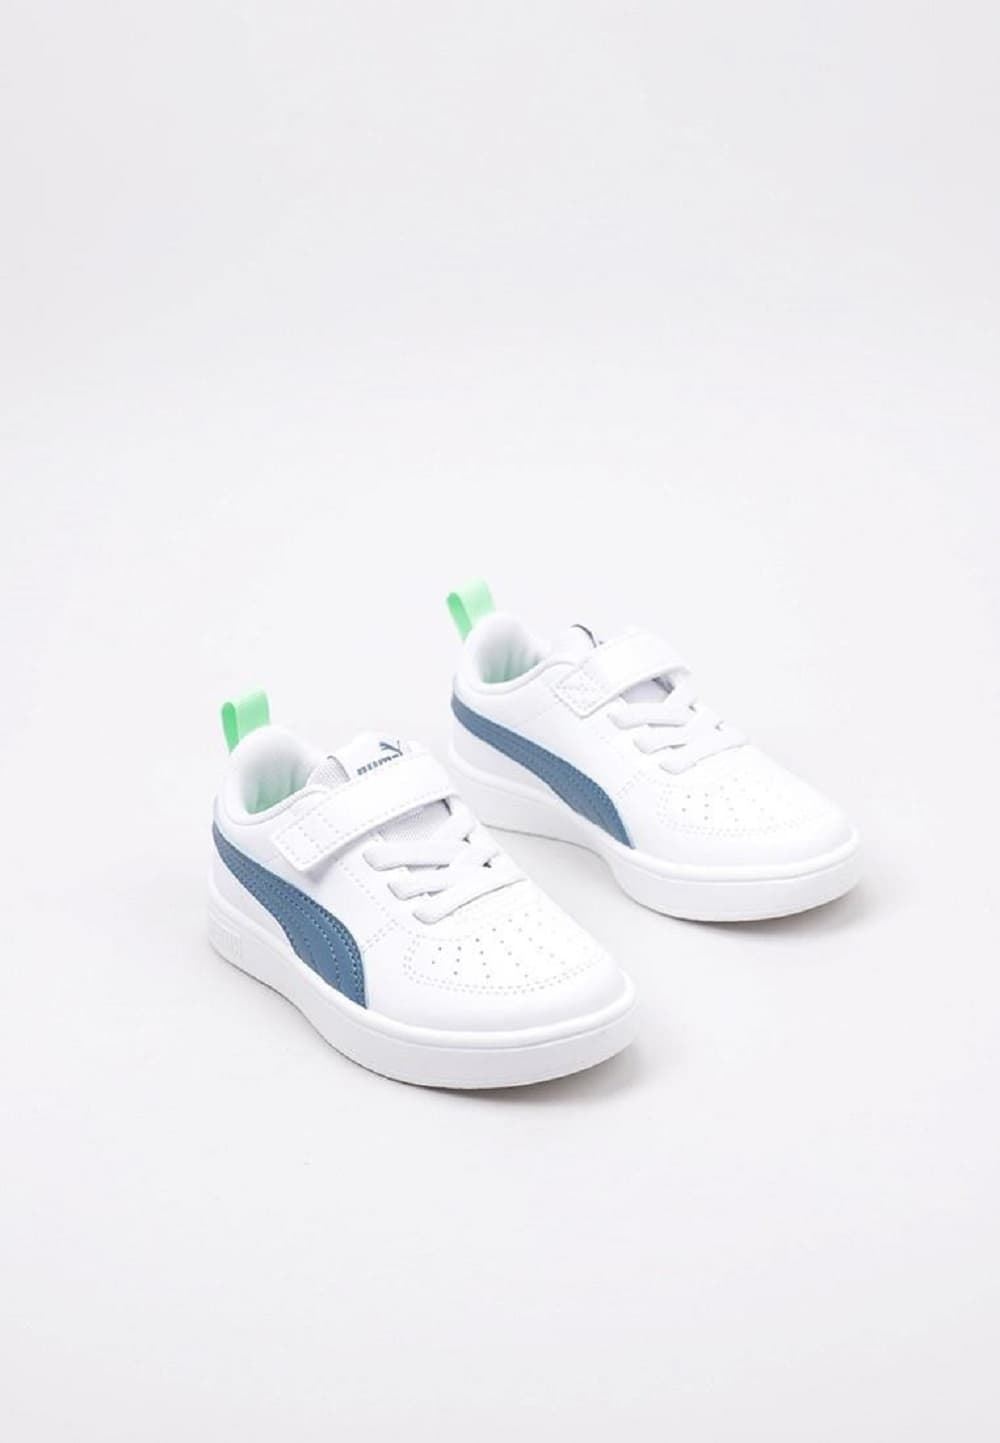 Puma Rickie Sneakers White-Jeans with Velcro - Image 2